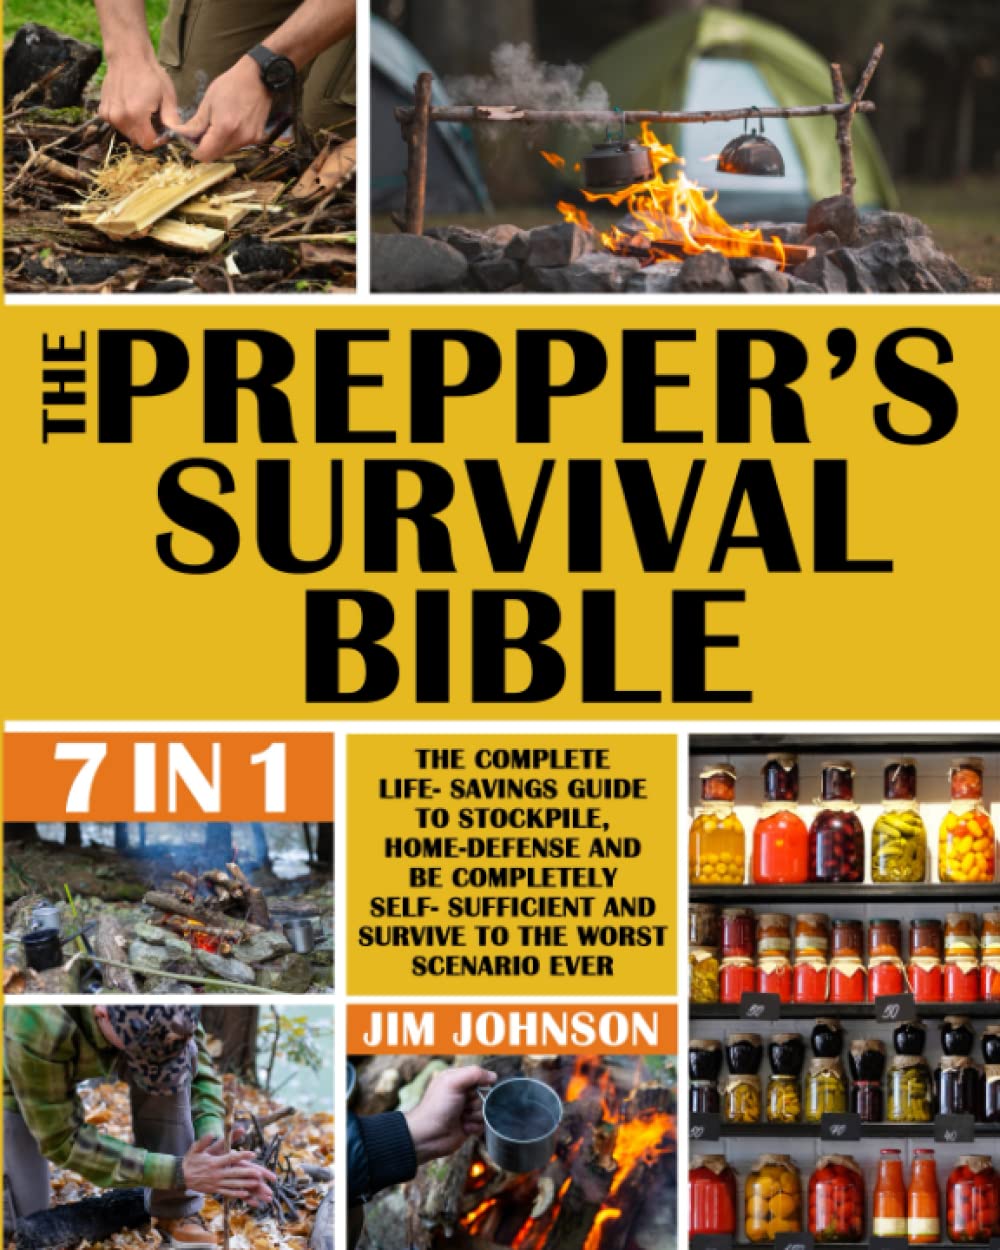 The Prepper’s Survival Bible: The Complete Life-Savings Guide to Stockpile,Home-Defense and be Completely Self-Sufficient and Survive to the Worst Scenario ever